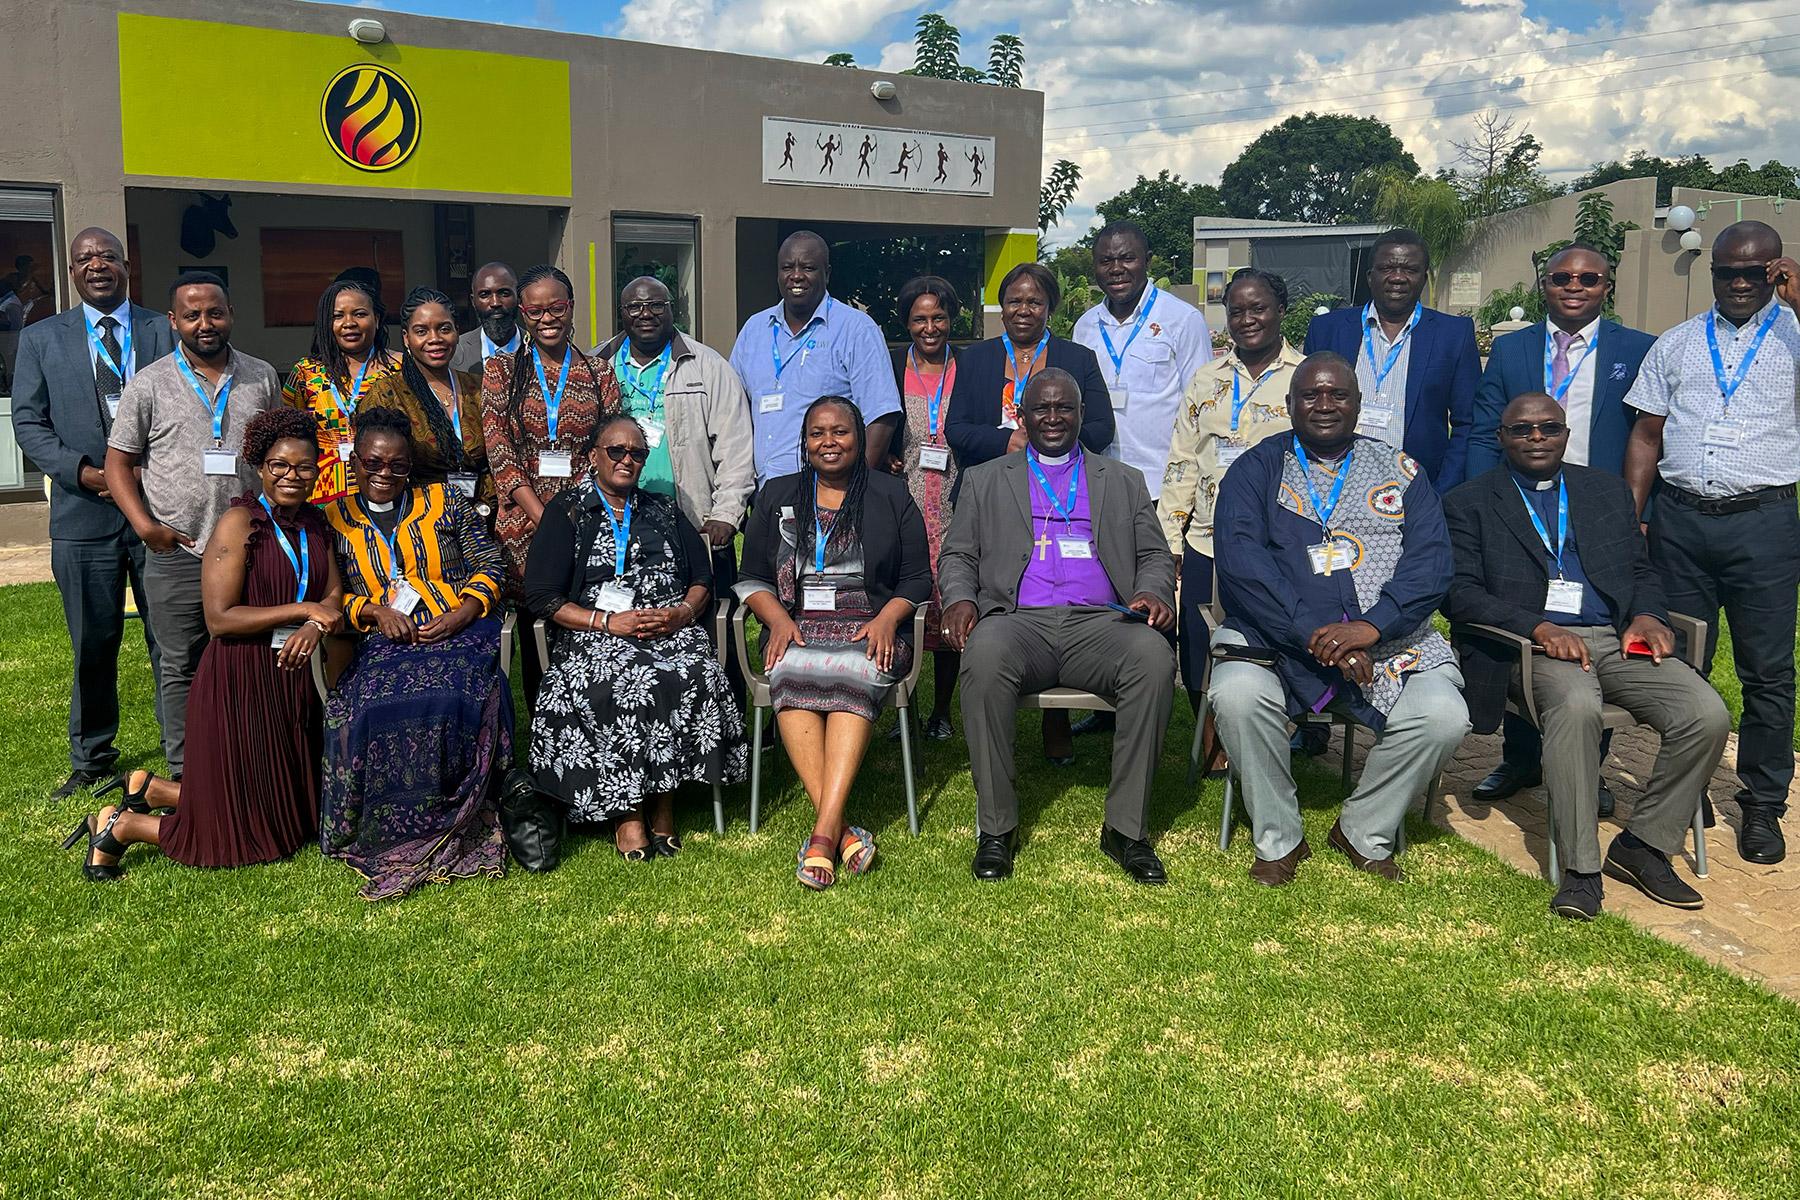 UPR Implementation and Peer Learning workshop in Zimbabwe